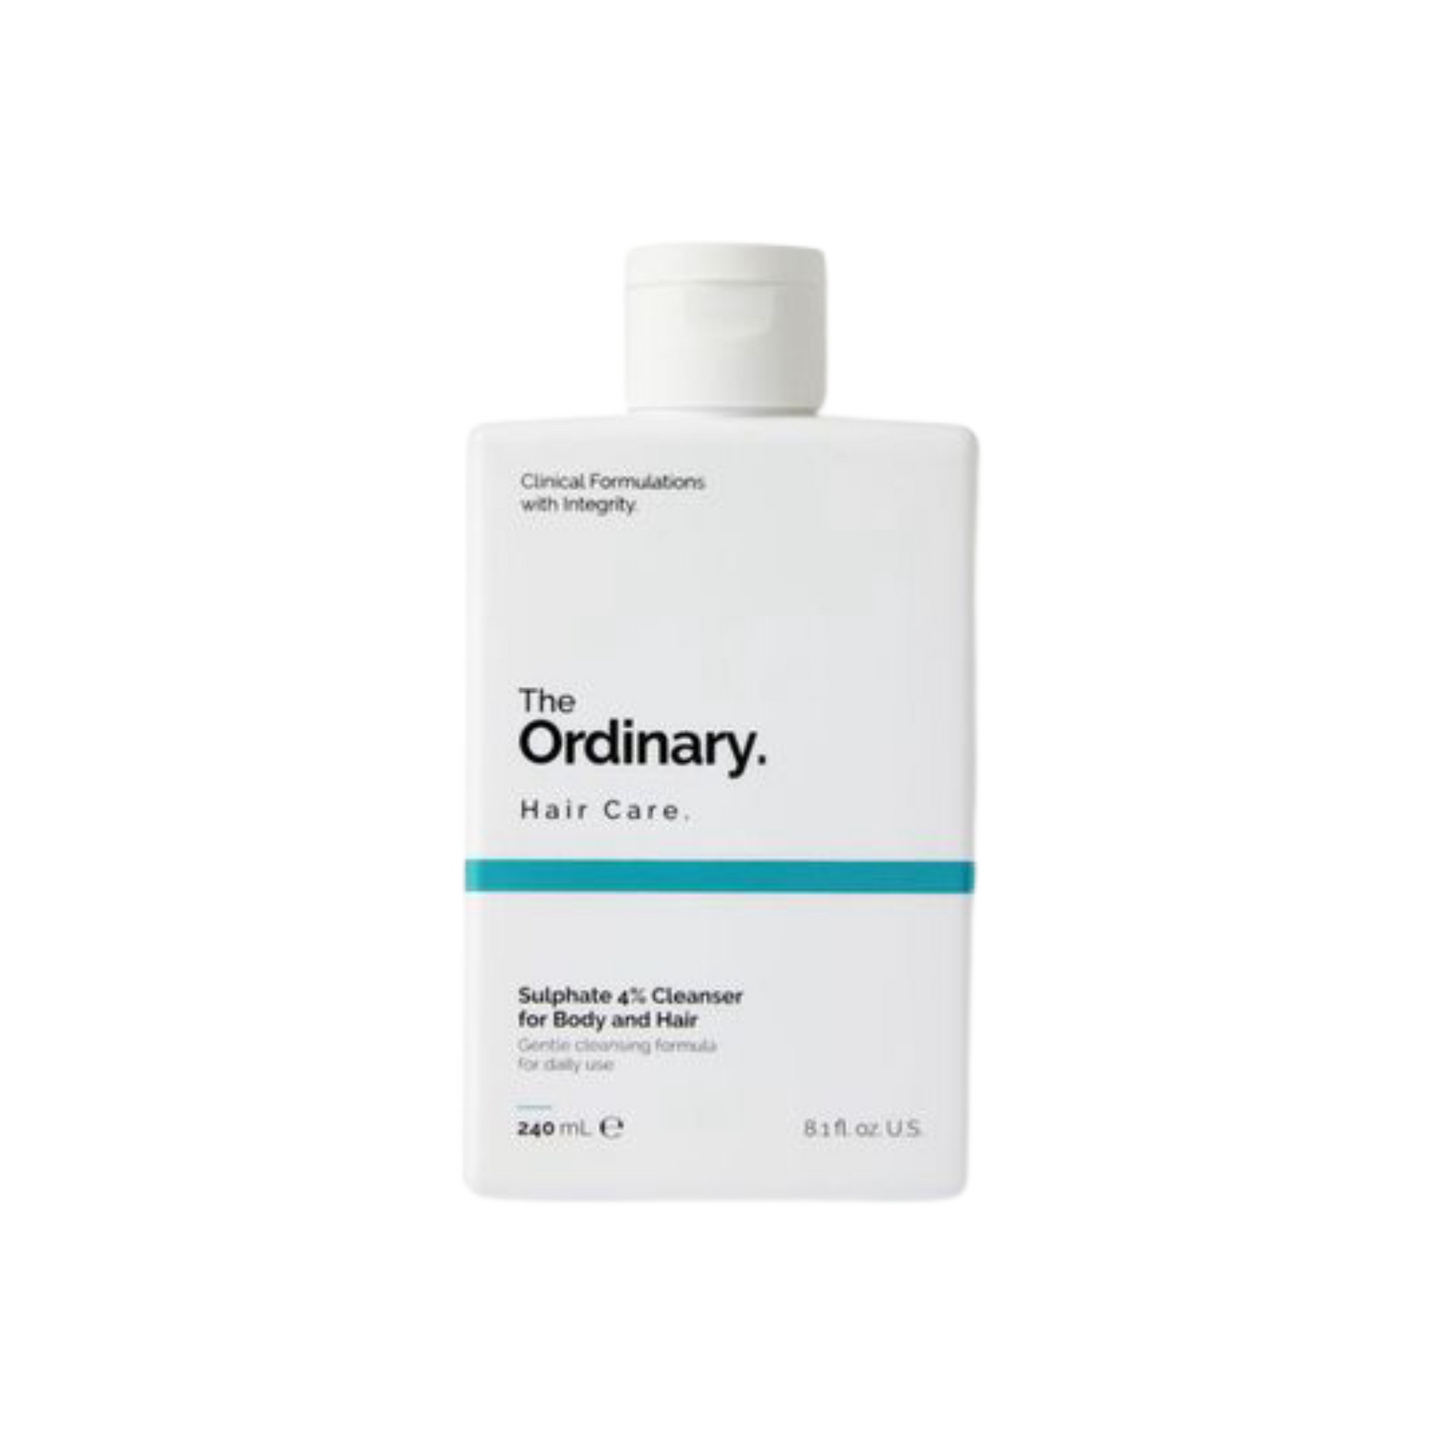 The Ordinary - Sulphate 4% Cleanser for Body & Hair